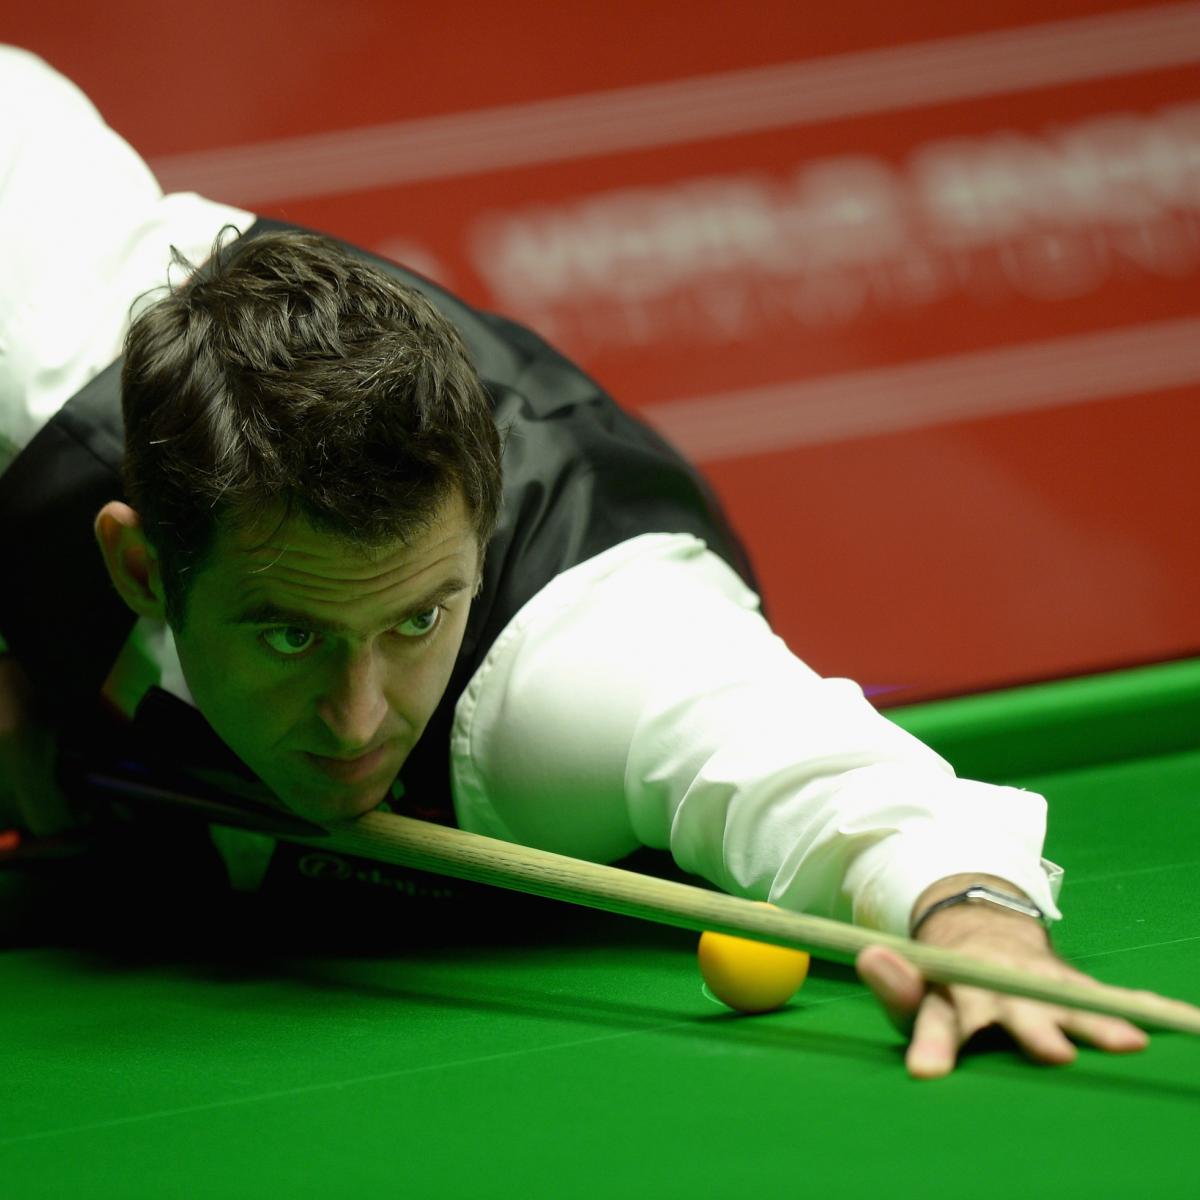 World Snooker Championship 2014 Final: Scores, Results, Schedule and